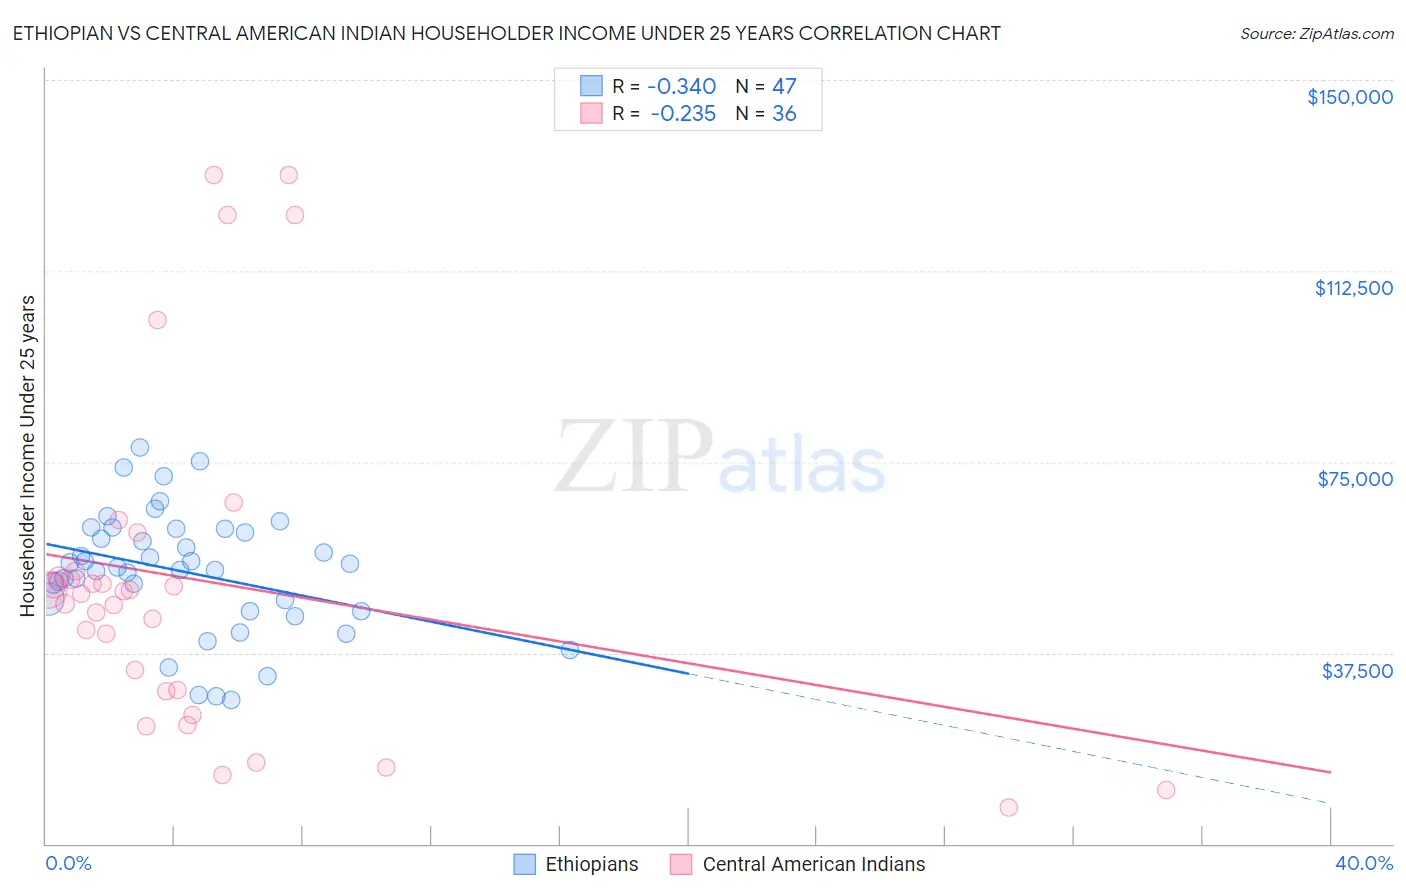 Ethiopian vs Central American Indian Householder Income Under 25 years